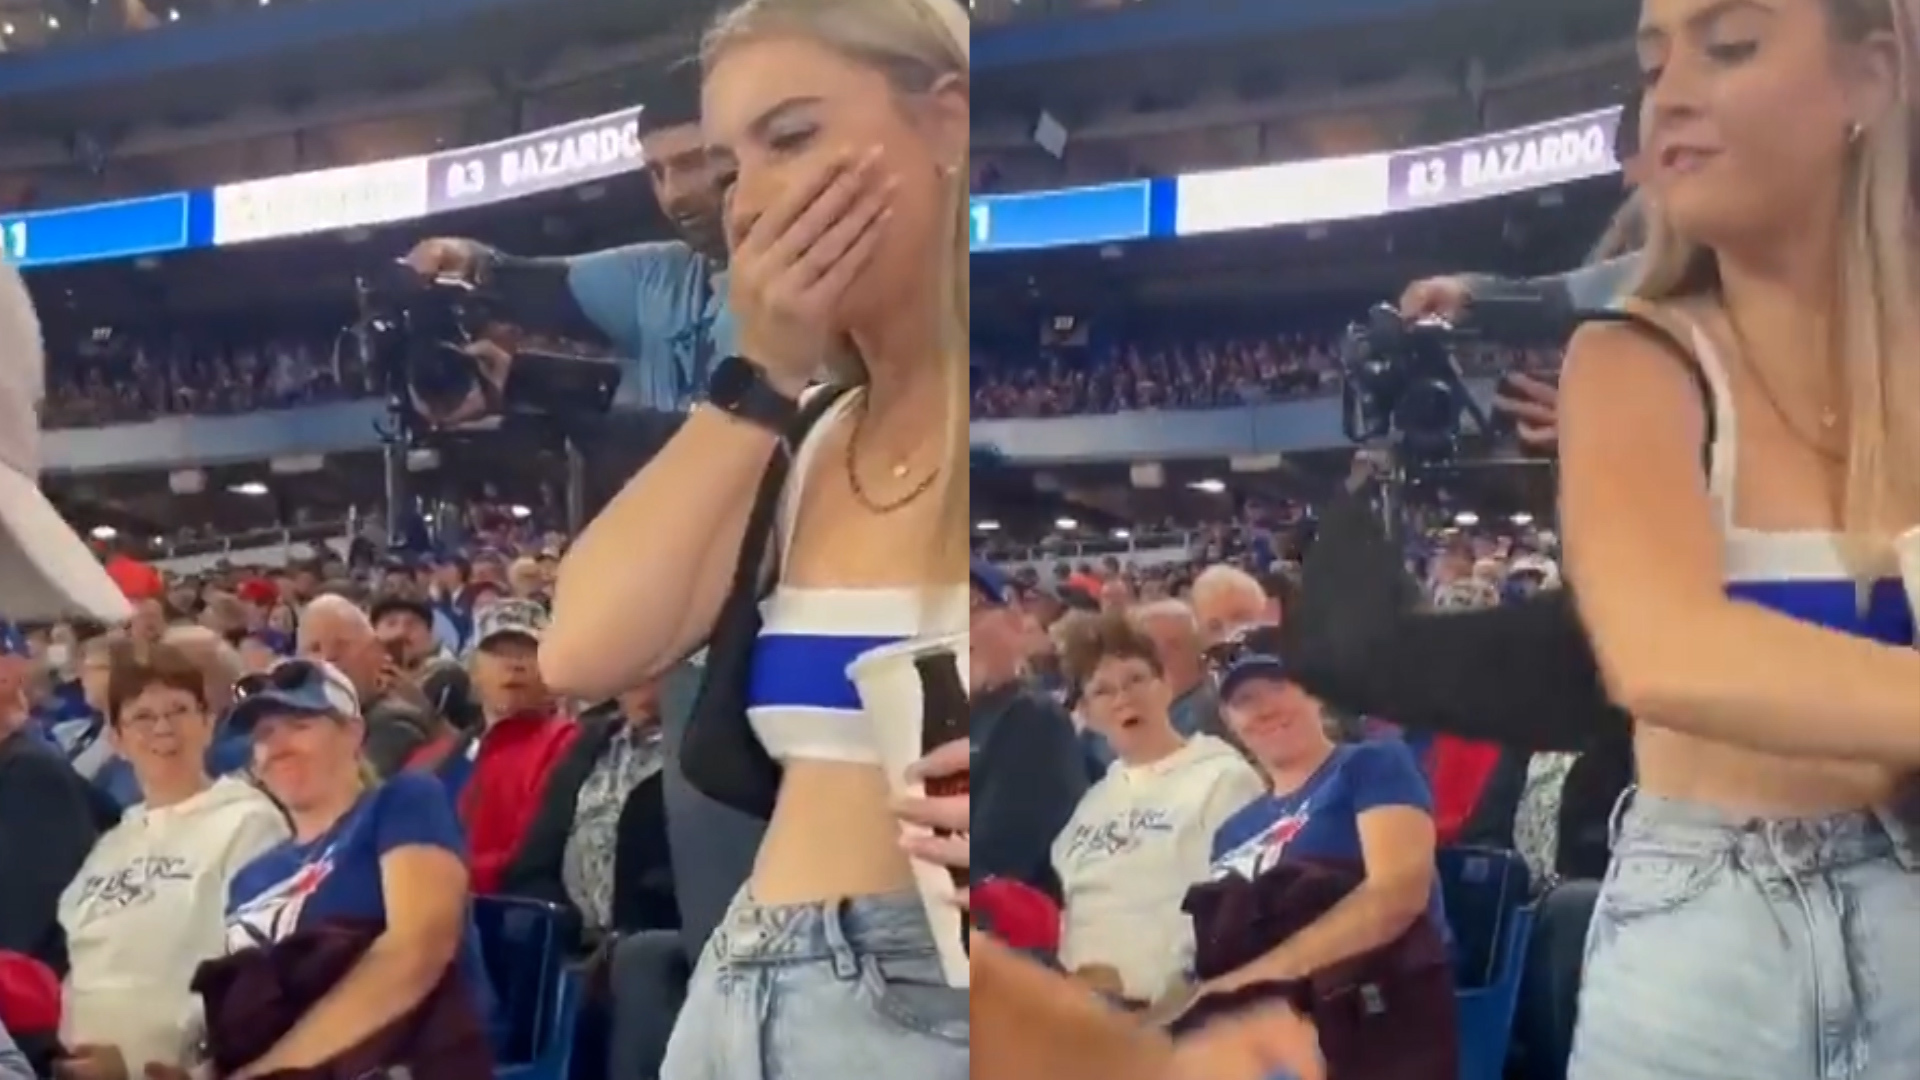 Man gets slapped by girlfriend after proposing at MLB game